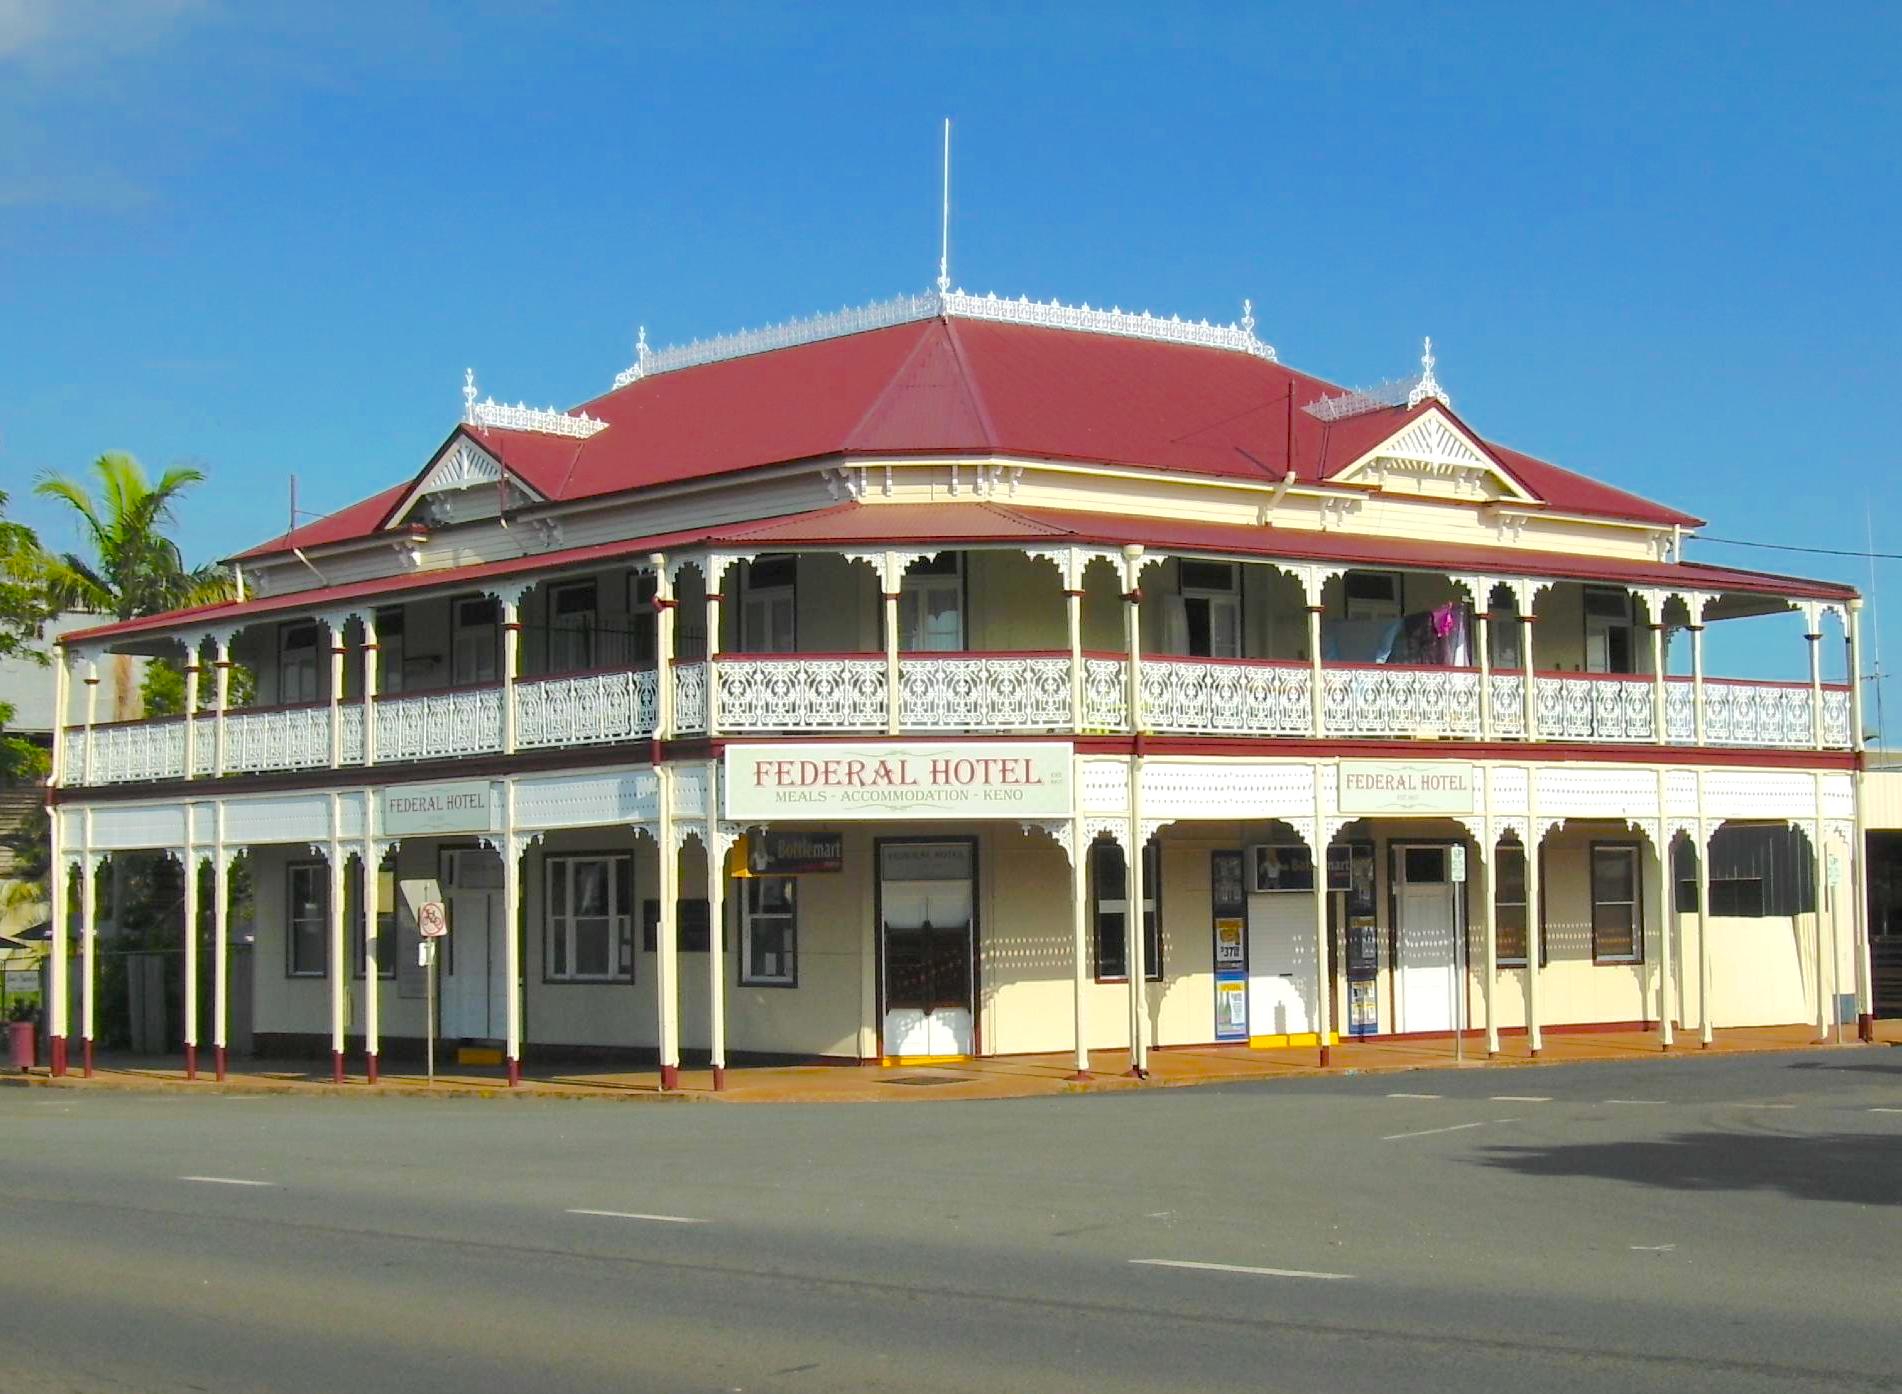 The Federal Hotel, Childers, Queensland